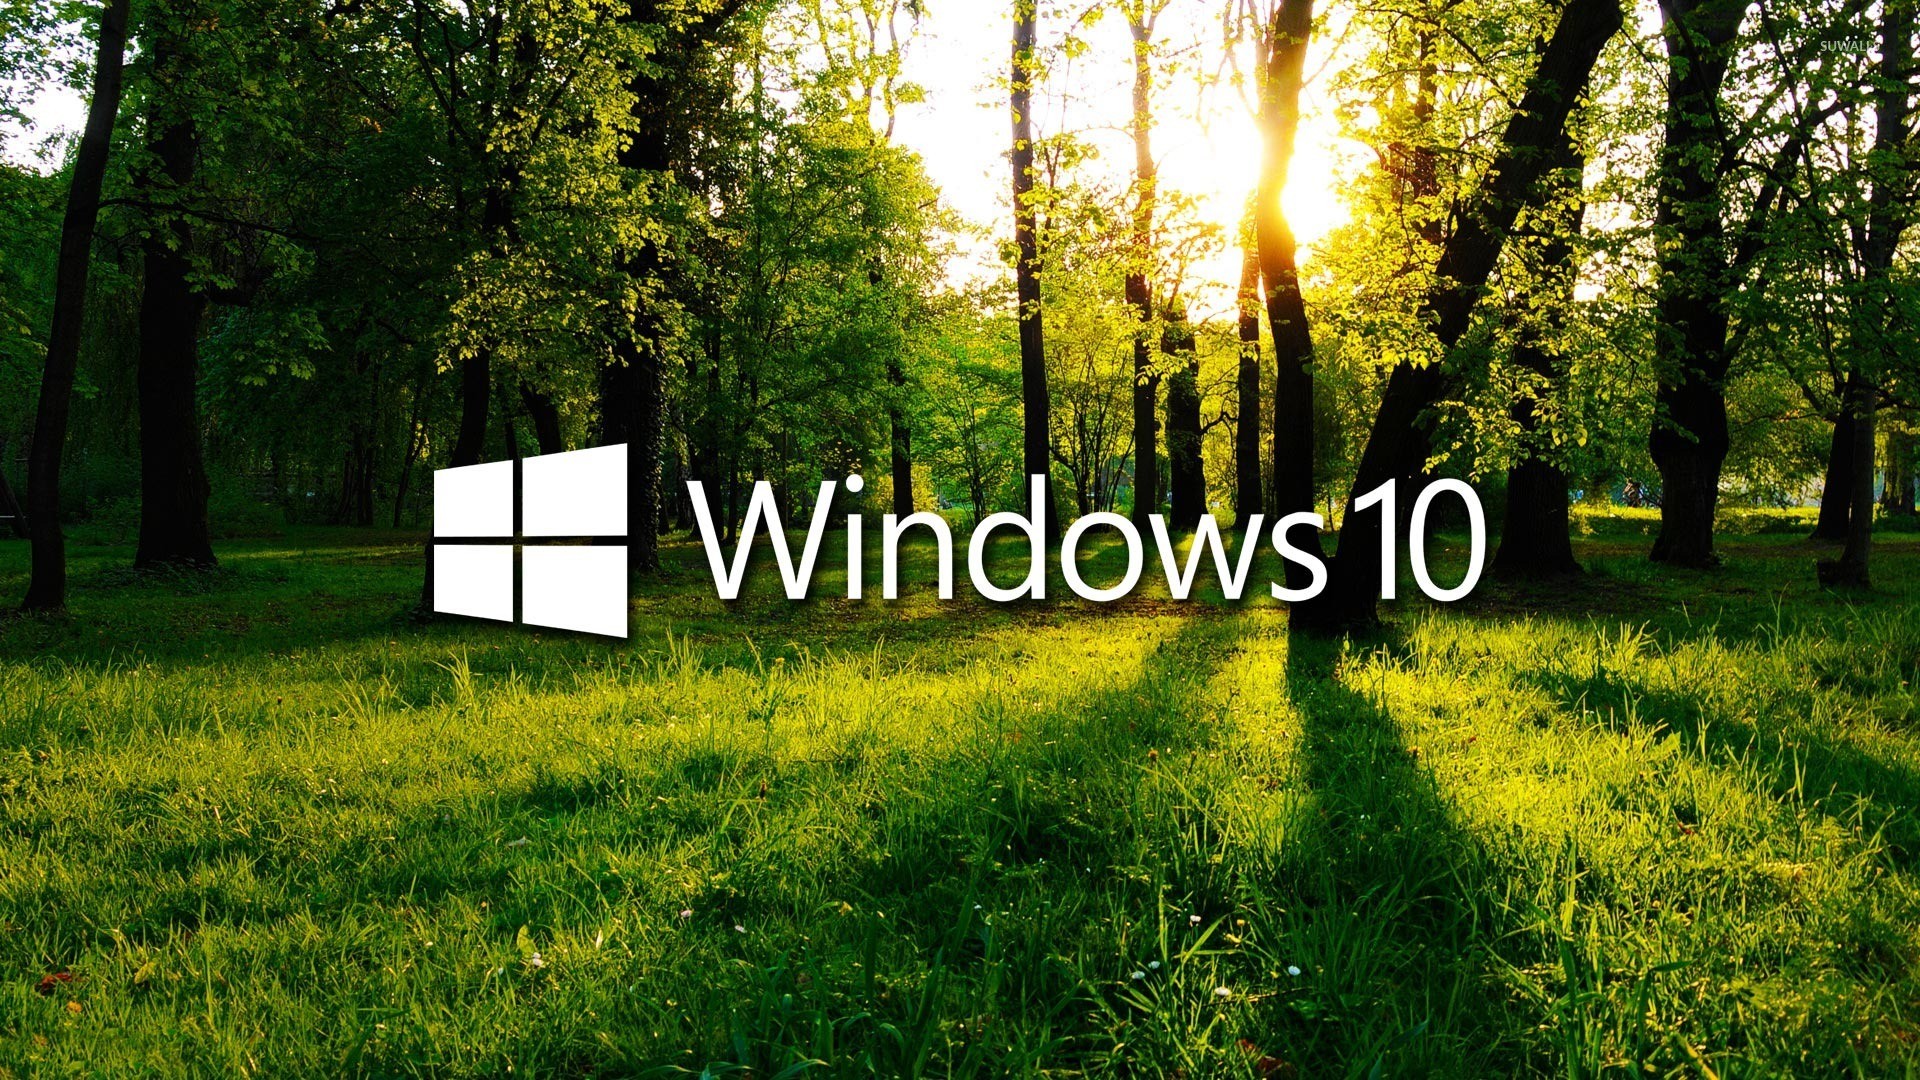 1920x1080 Windows 10 in the green forest white logo with text wallpaper  jpg